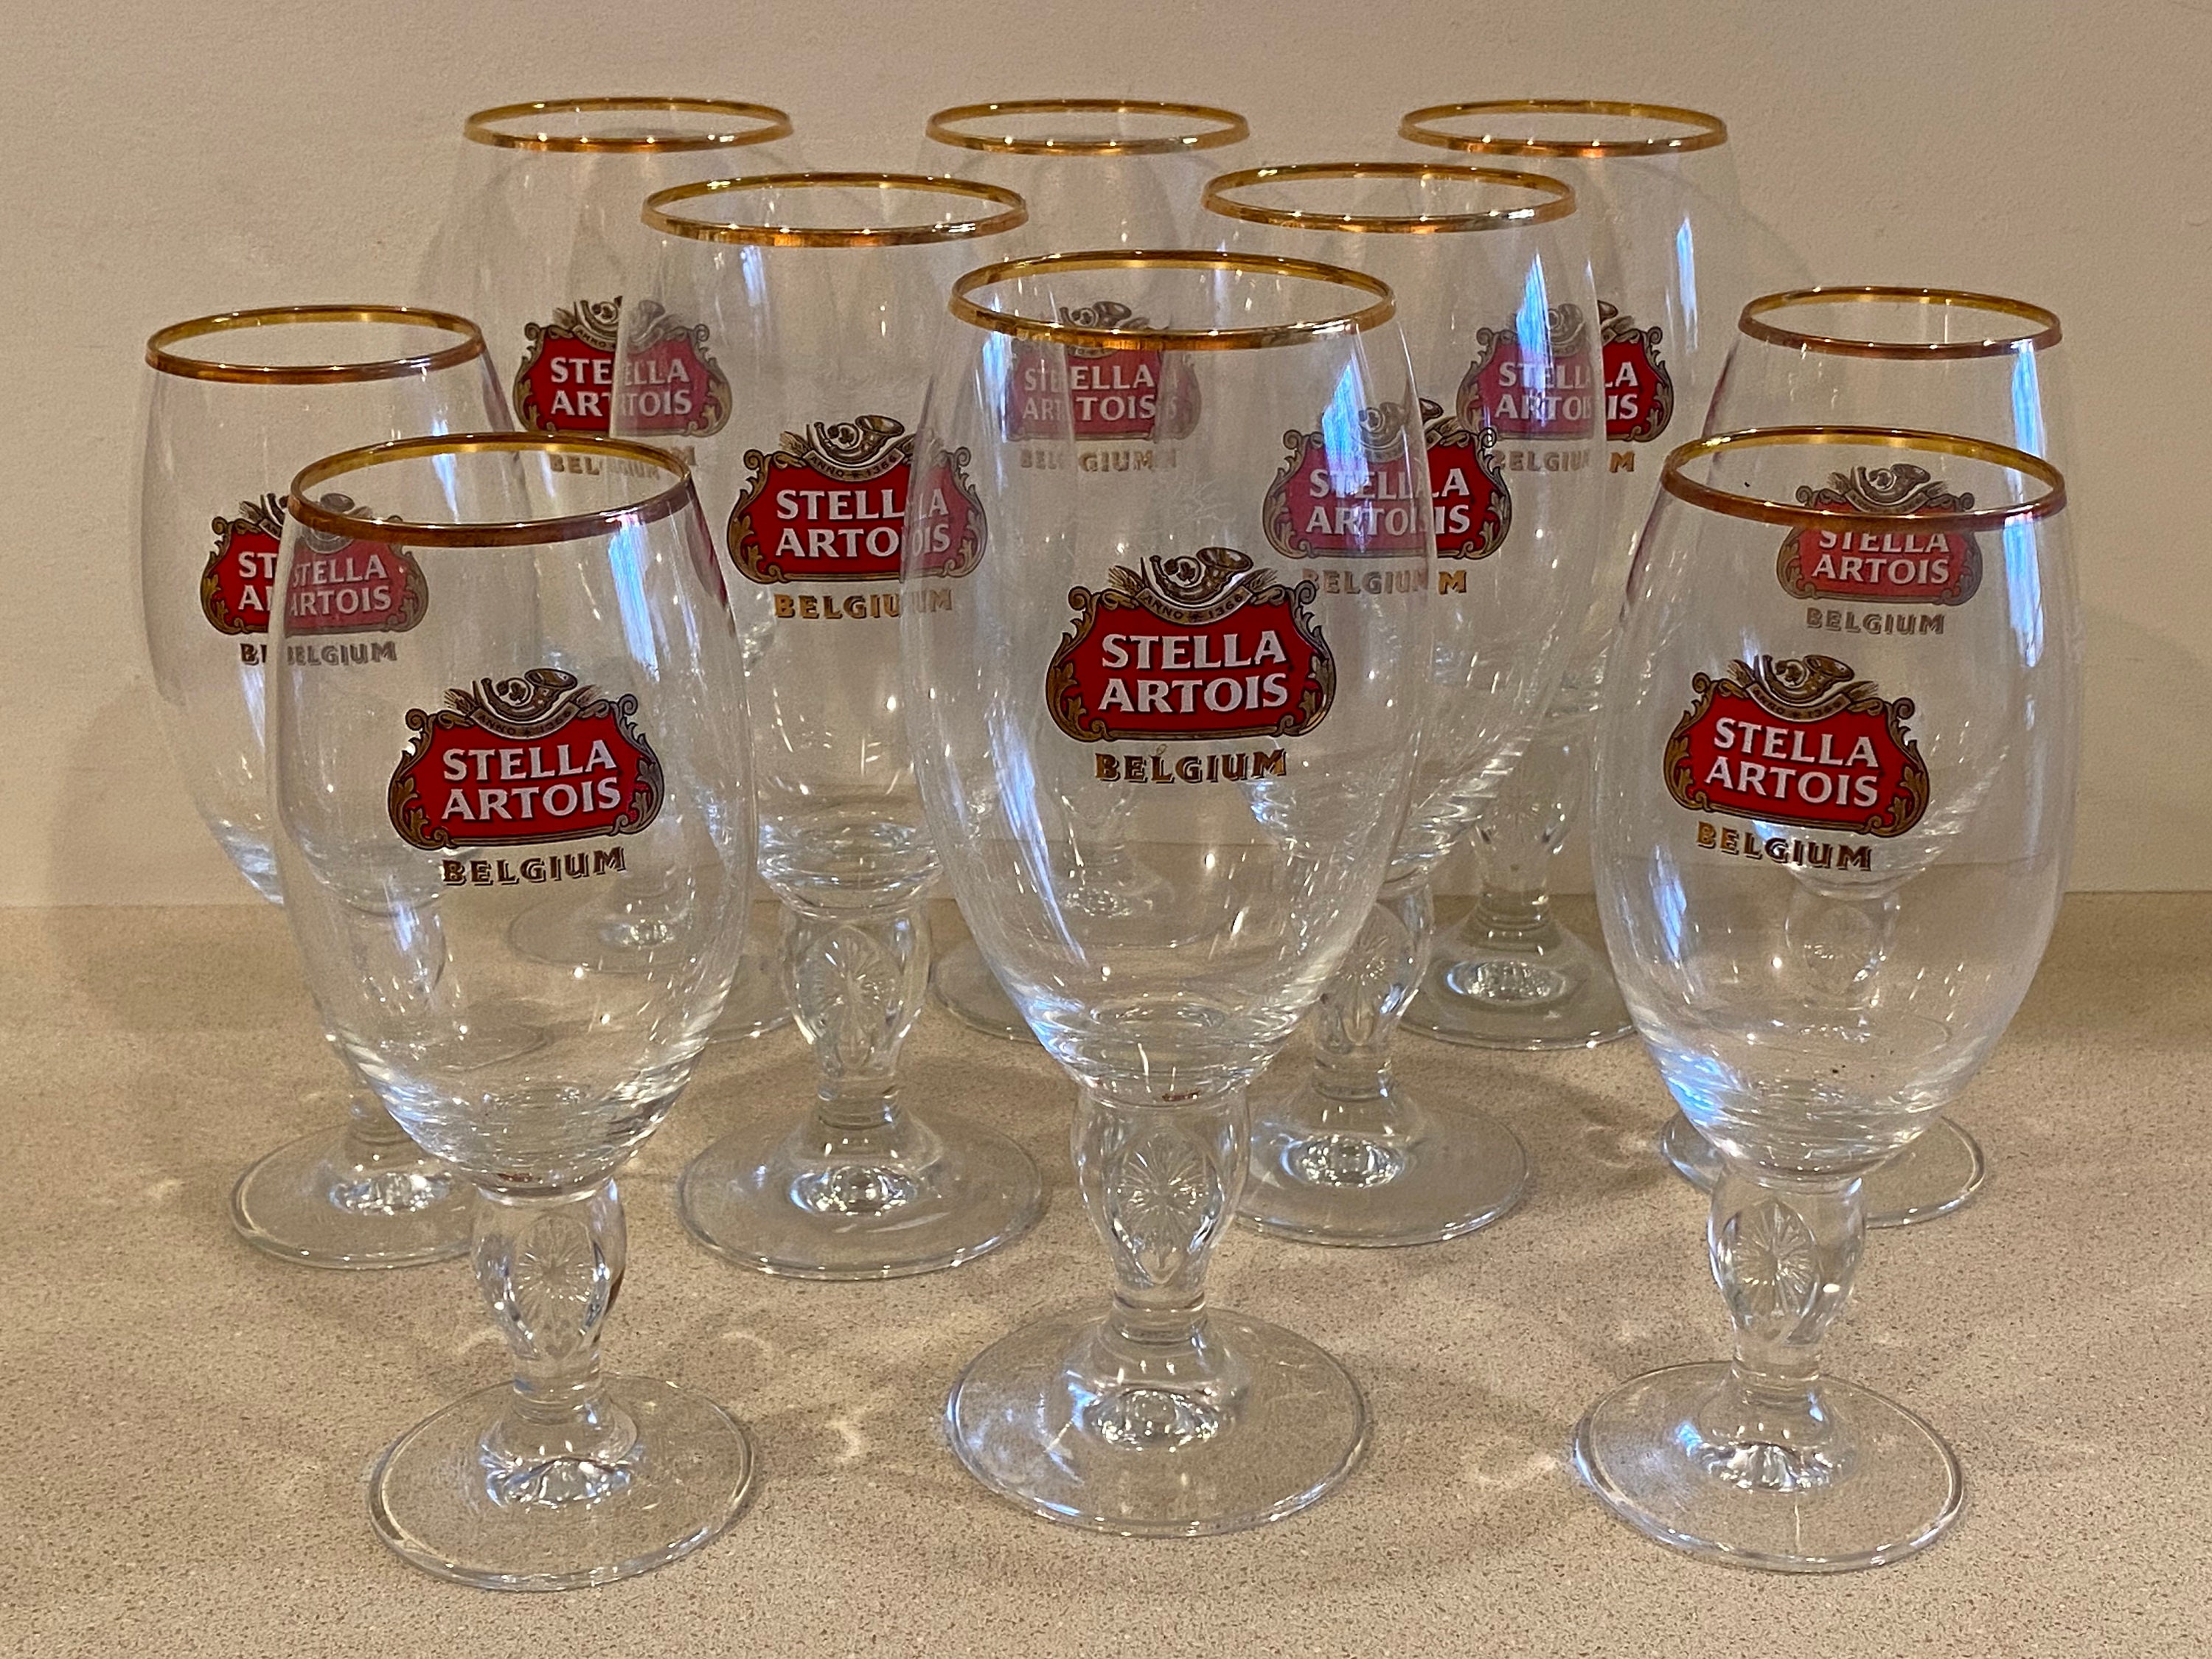 Engraved Stella Artois Chalice Pint Glass. Personalised With Your Message.  Great for Dad or a Stella Lover 